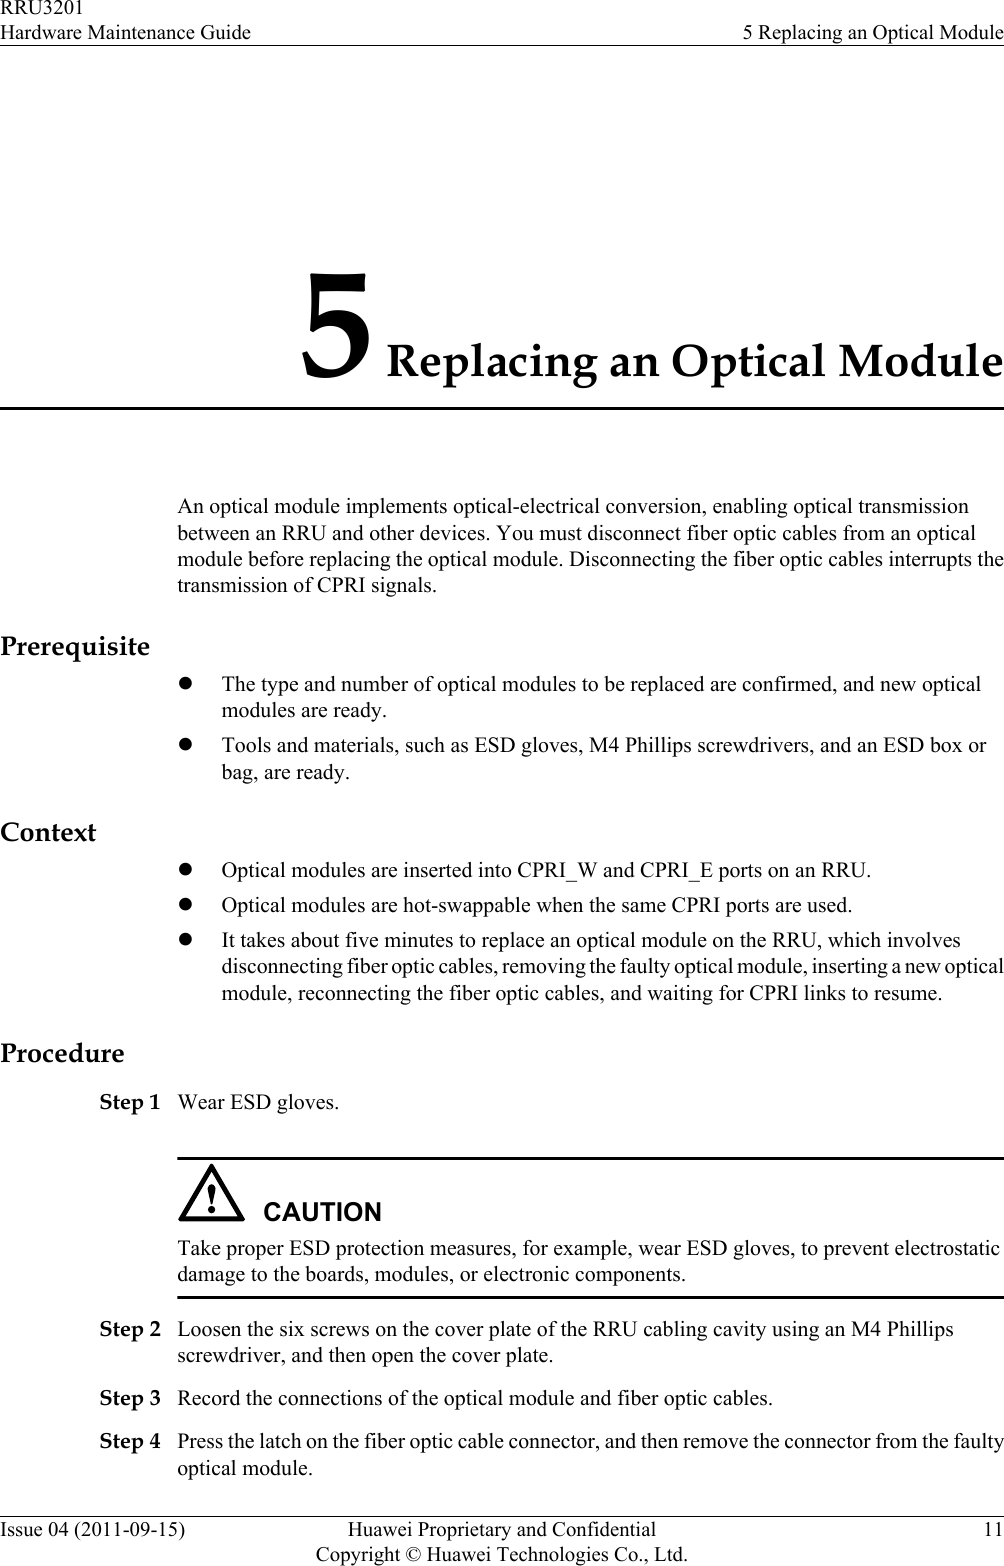 5 Replacing an Optical ModuleAn optical module implements optical-electrical conversion, enabling optical transmissionbetween an RRU and other devices. You must disconnect fiber optic cables from an opticalmodule before replacing the optical module. Disconnecting the fiber optic cables interrupts thetransmission of CPRI signals.PrerequisitelThe type and number of optical modules to be replaced are confirmed, and new opticalmodules are ready.lTools and materials, such as ESD gloves, M4 Phillips screwdrivers, and an ESD box orbag, are ready.ContextlOptical modules are inserted into CPRI_W and CPRI_E ports on an RRU.lOptical modules are hot-swappable when the same CPRI ports are used.lIt takes about five minutes to replace an optical module on the RRU, which involvesdisconnecting fiber optic cables, removing the faulty optical module, inserting a new opticalmodule, reconnecting the fiber optic cables, and waiting for CPRI links to resume.ProcedureStep 1 Wear ESD gloves.CAUTIONTake proper ESD protection measures, for example, wear ESD gloves, to prevent electrostaticdamage to the boards, modules, or electronic components.Step 2 Loosen the six screws on the cover plate of the RRU cabling cavity using an M4 Phillipsscrewdriver, and then open the cover plate.Step 3 Record the connections of the optical module and fiber optic cables.Step 4 Press the latch on the fiber optic cable connector, and then remove the connector from the faultyoptical module.RRU3201Hardware Maintenance Guide 5 Replacing an Optical ModuleIssue 04 (2011-09-15) Huawei Proprietary and ConfidentialCopyright © Huawei Technologies Co., Ltd.11